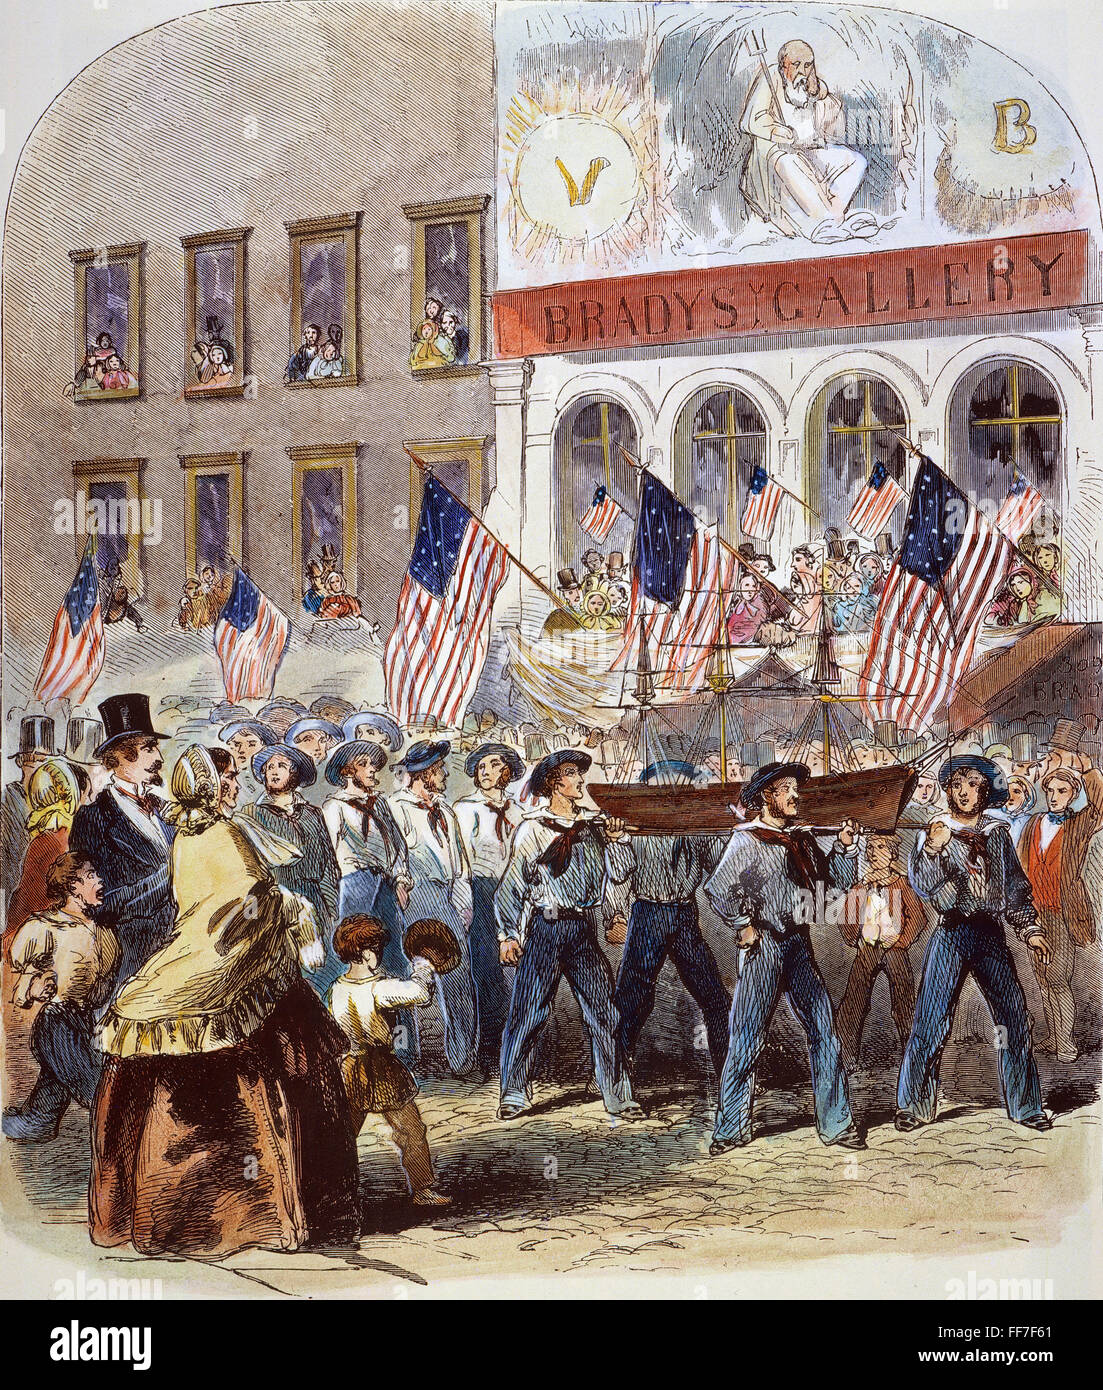 ATLANTIC CABLE PARADE 1858. /nSailors from the Niagara parading on Broadway past Mathew Brady's studio, after the laying of the first cable to Europe in 1858: colored wood engraving, 1858. Stock Photo